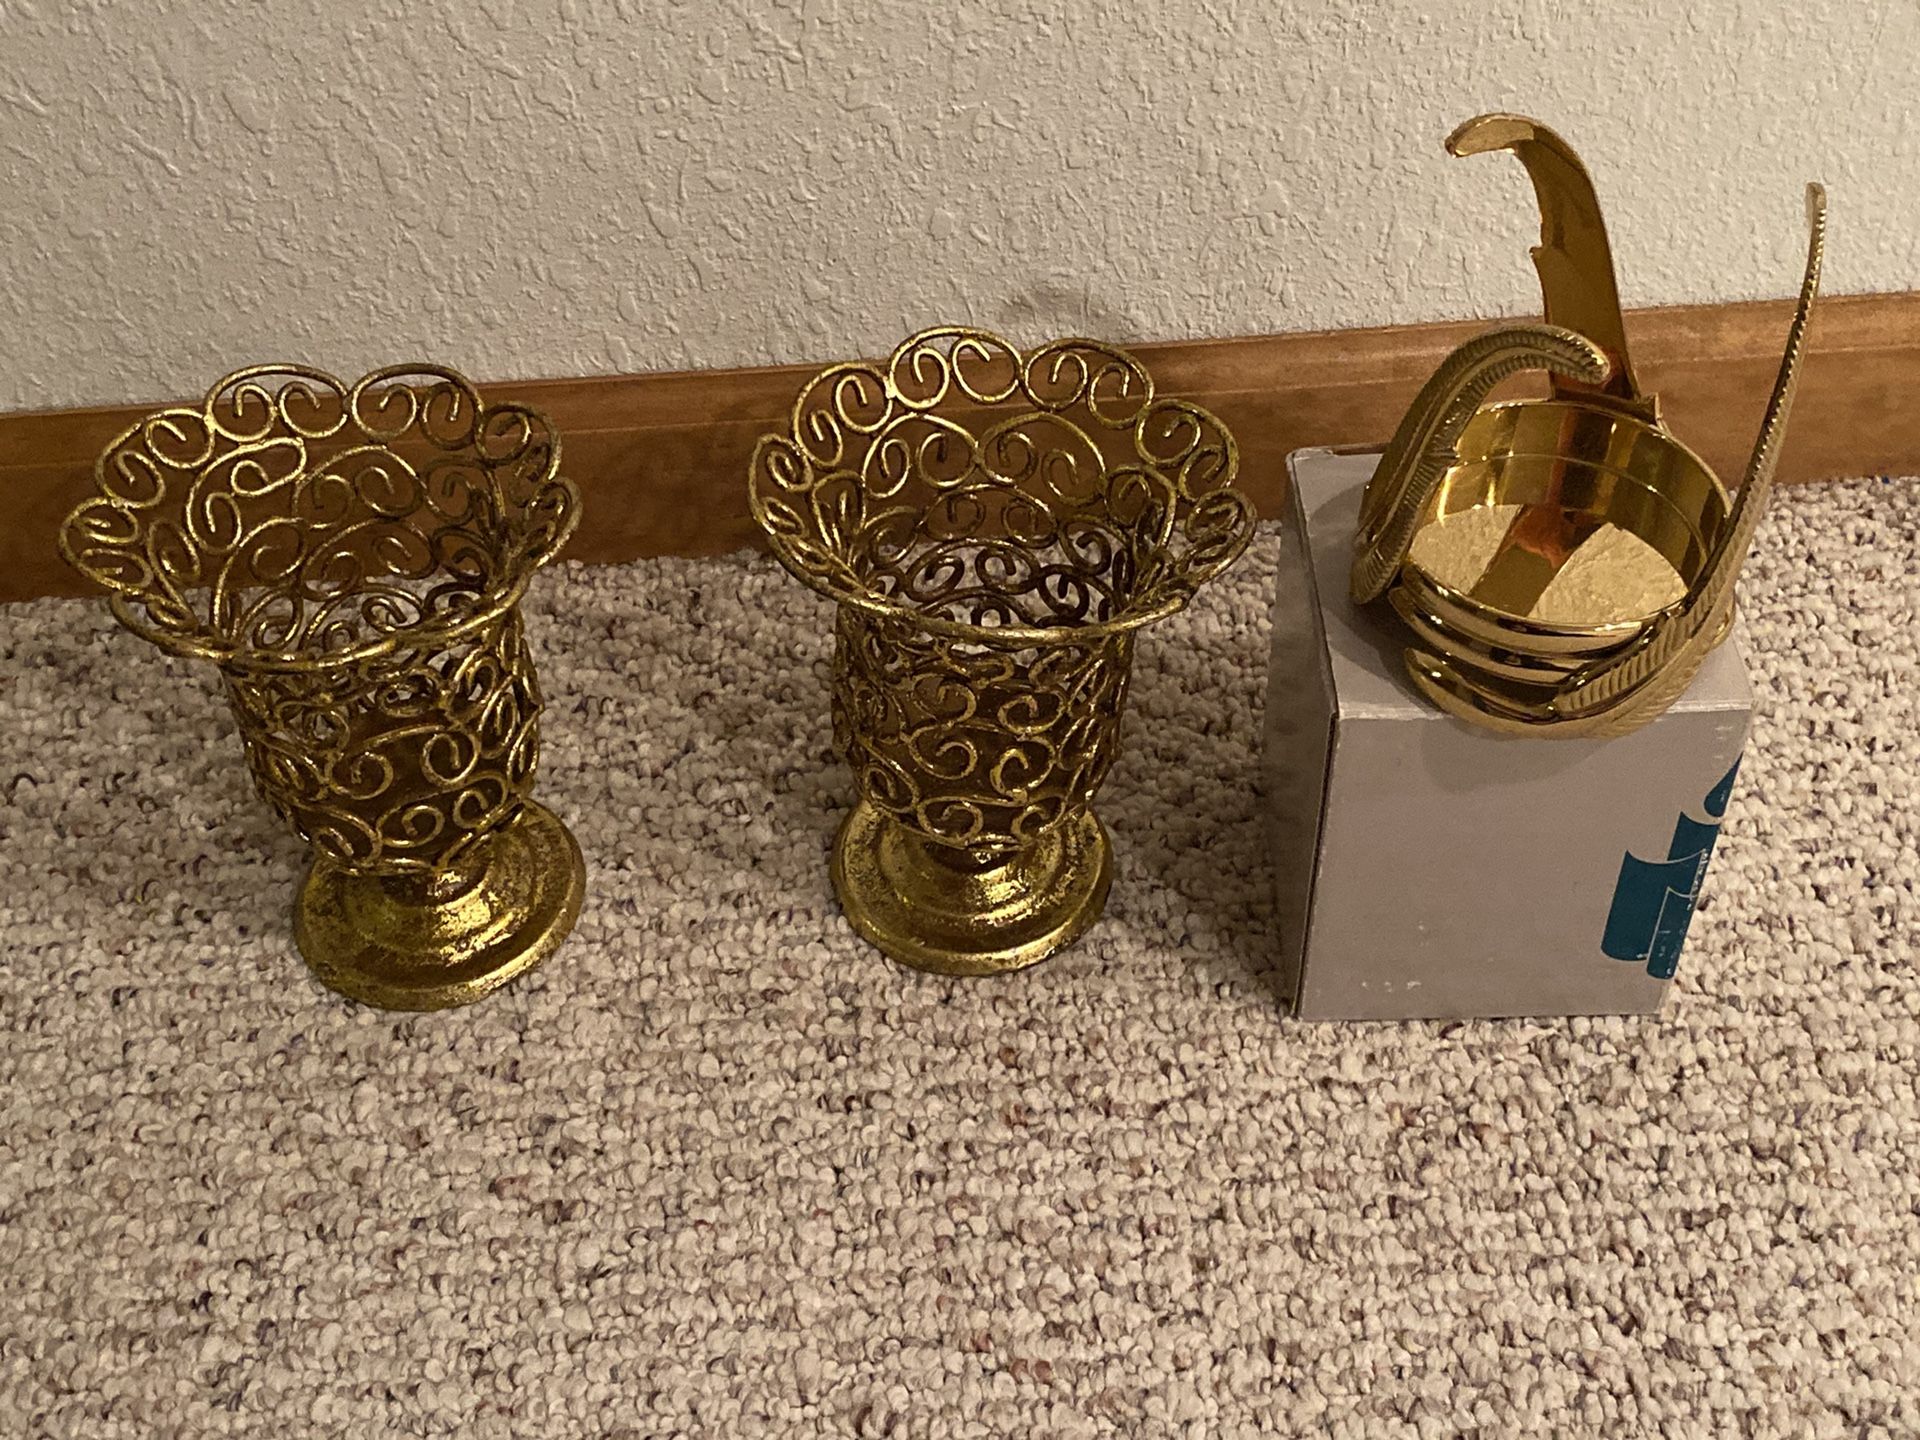 New Partylite candle holders